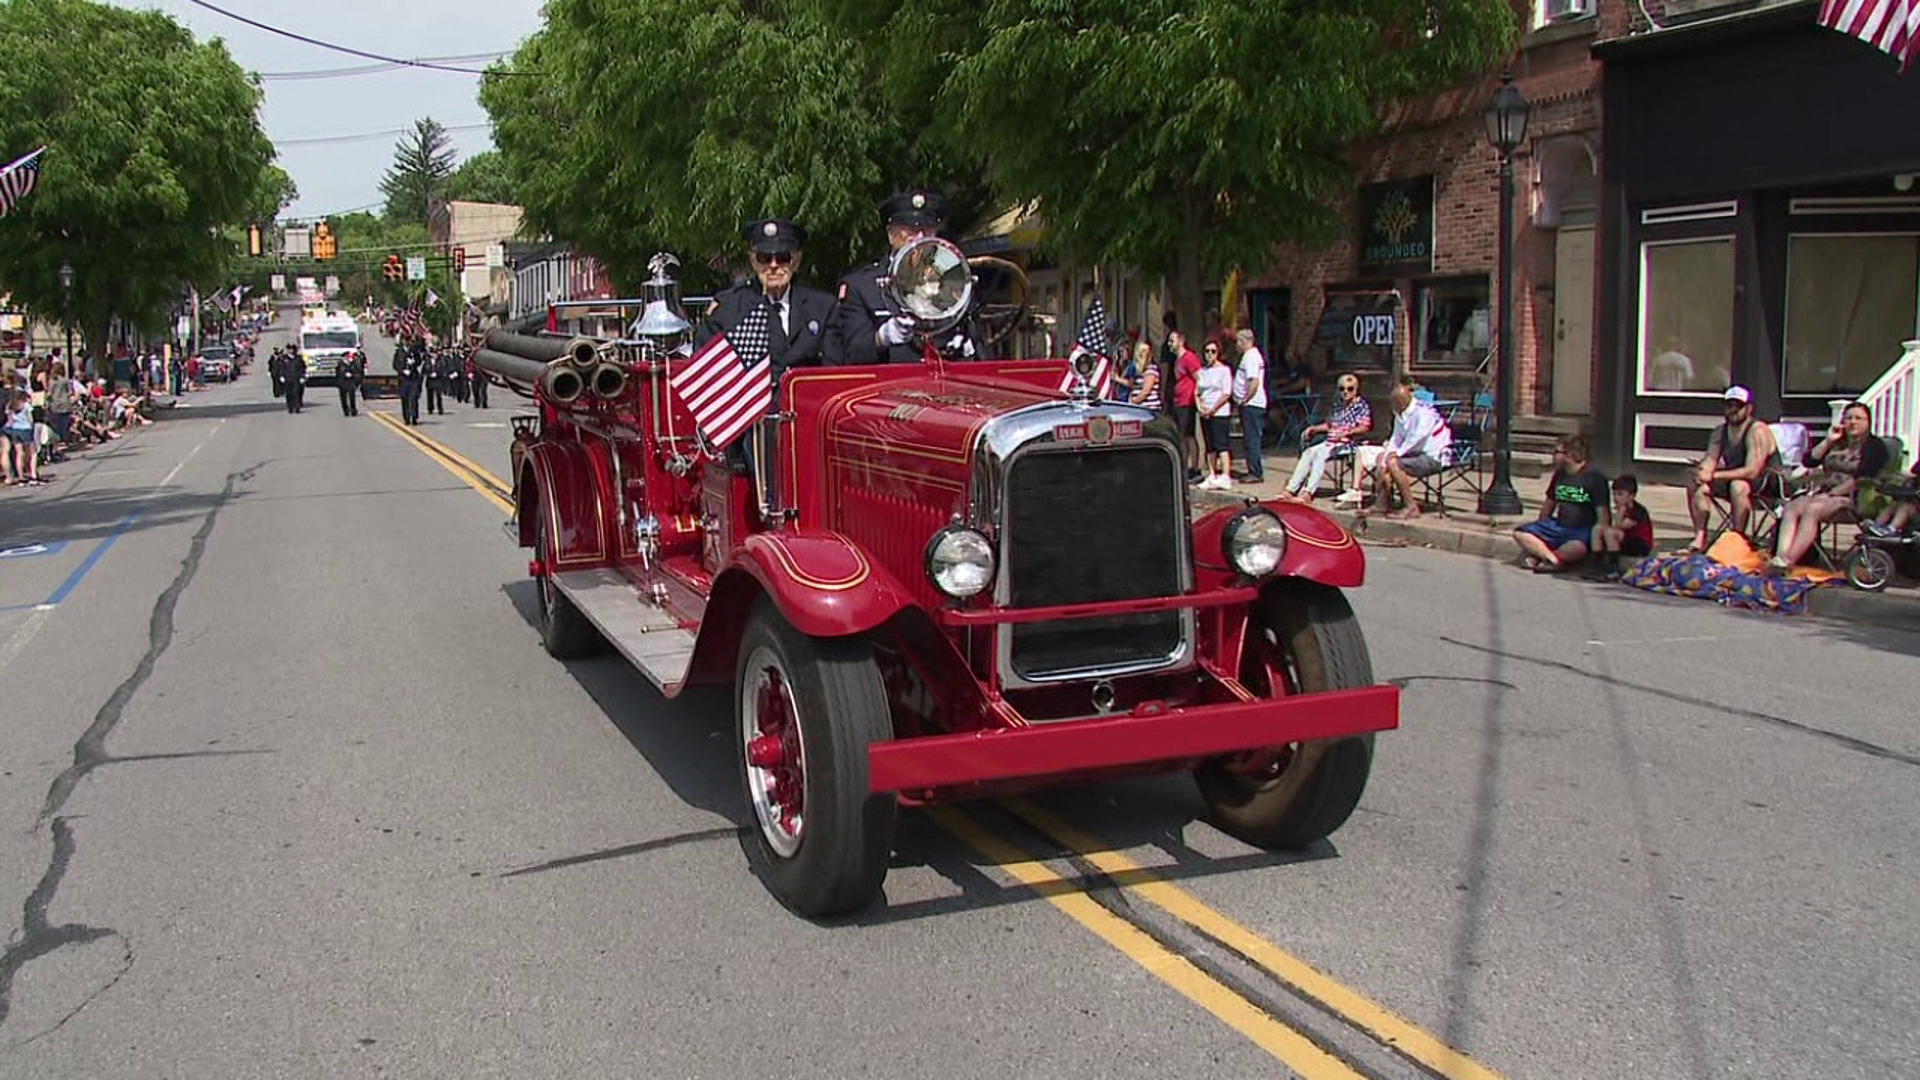 The Memorial Day parade route stretched throughout Tunkhannock.